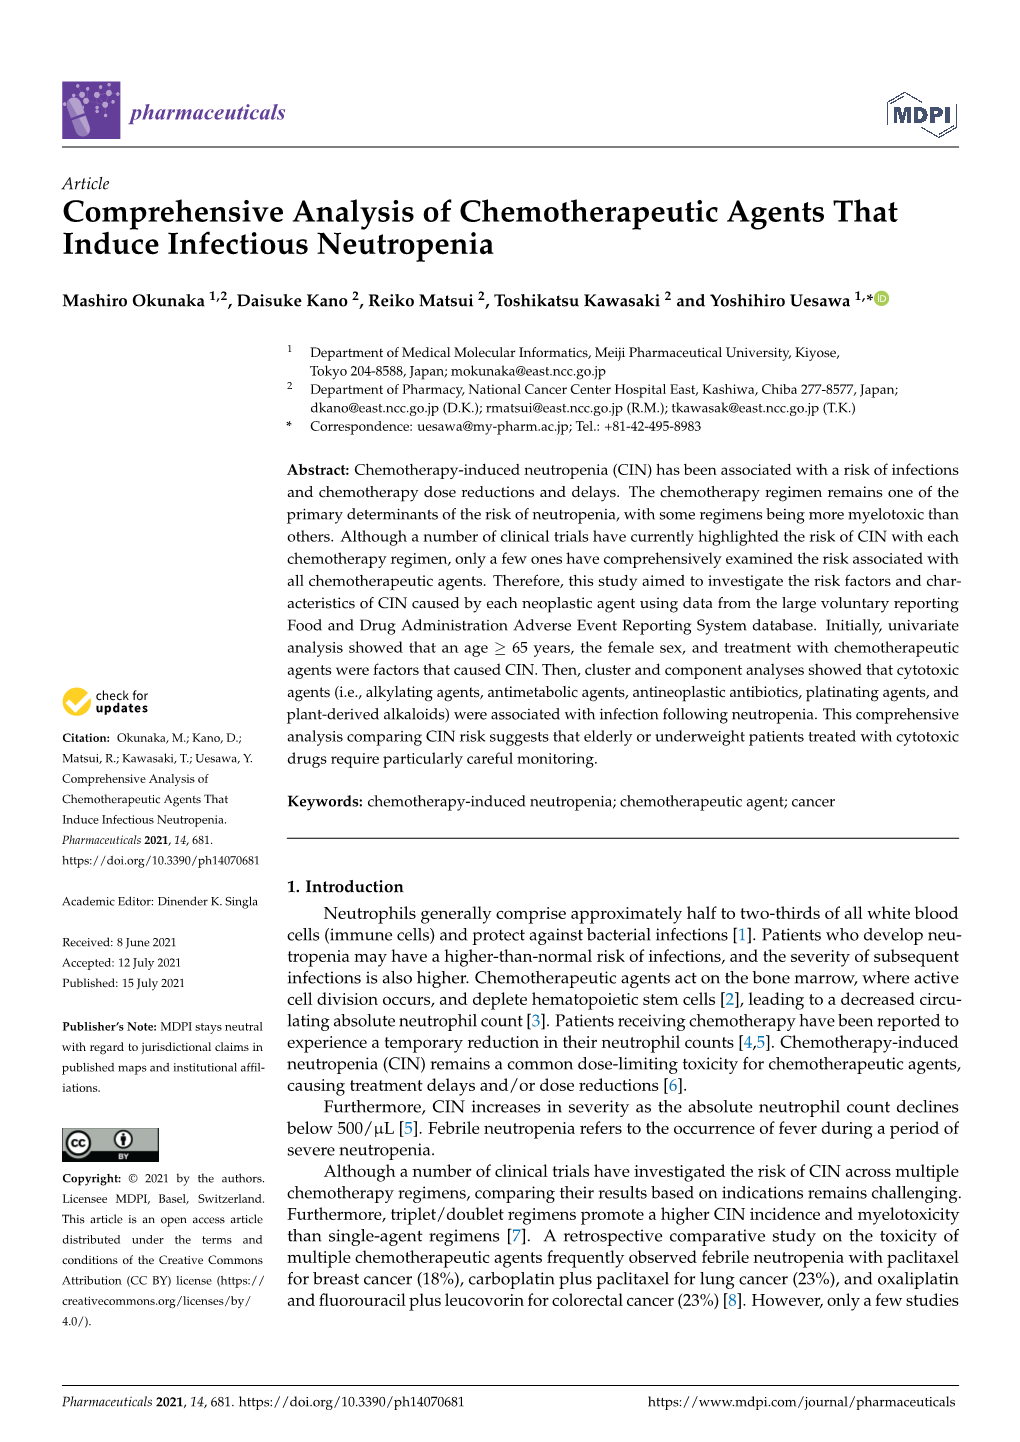 Comprehensive Analysis of Chemotherapeutic Agents That Induce Infectious Neutropenia